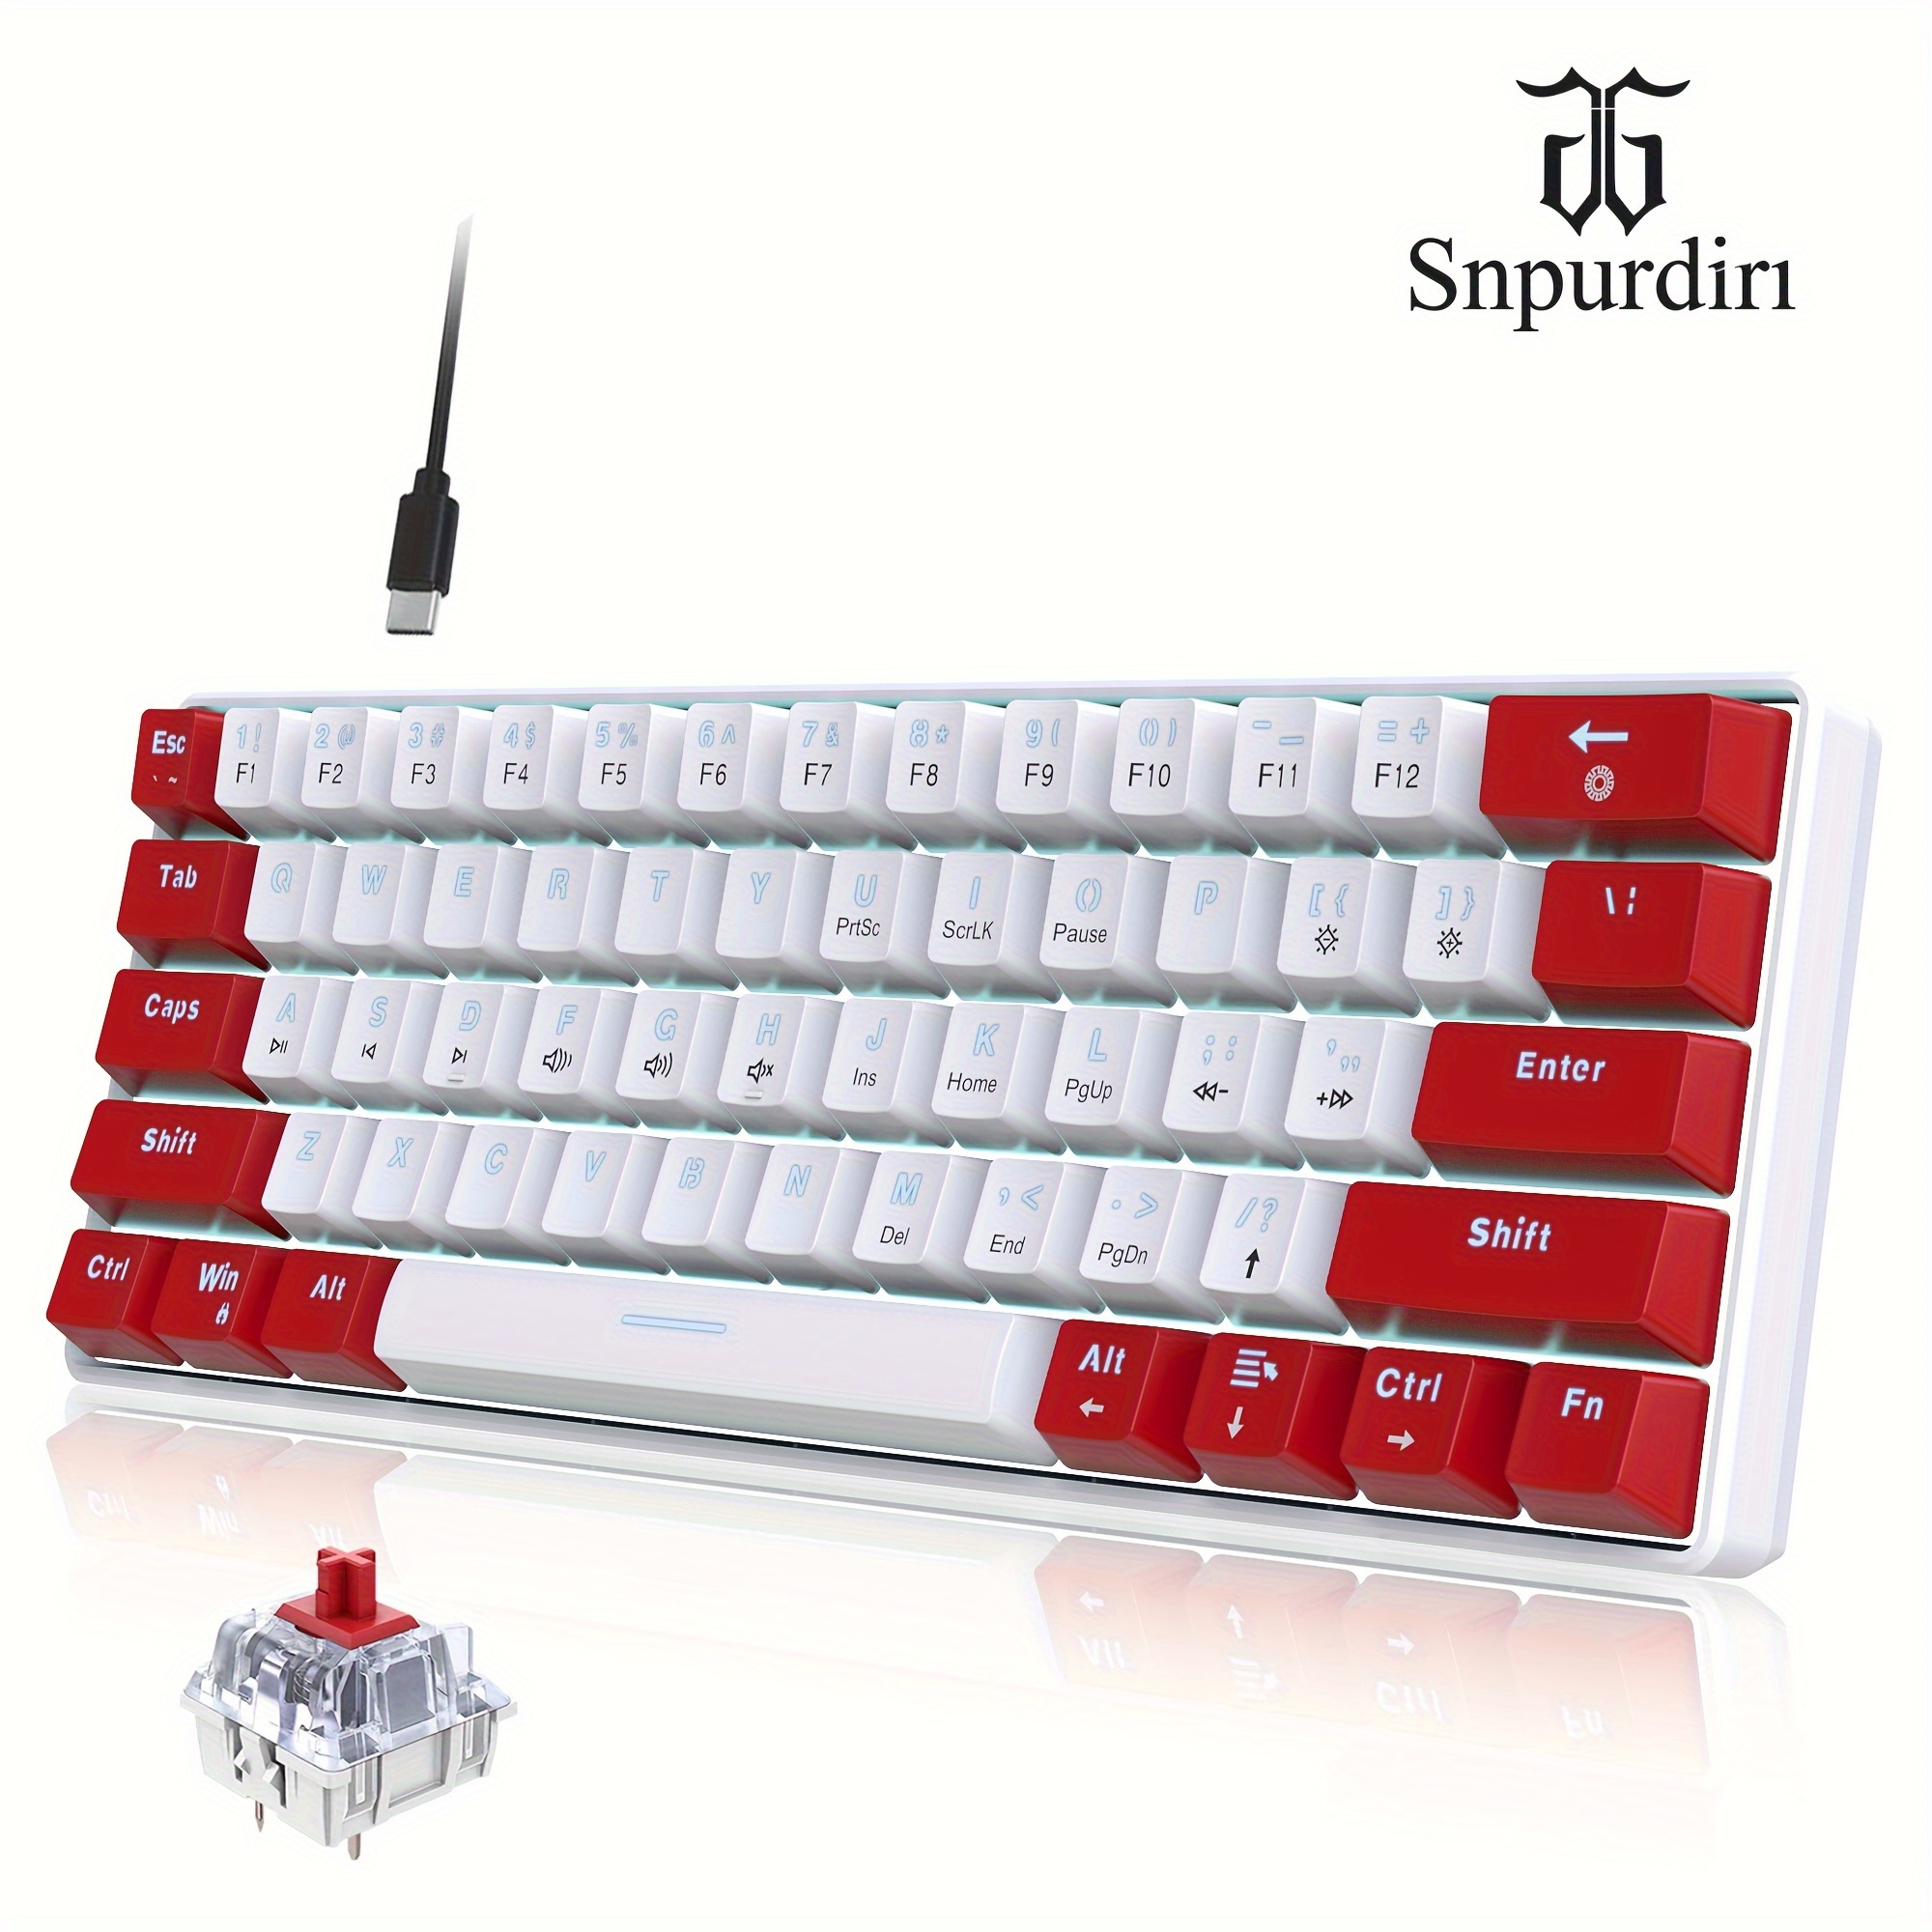 

61 Keys Mechanical Wired 60% Mechanical Gaming Keyboard Red Axis Keys Portable Mini Keyboard For Windows Laptop -red White